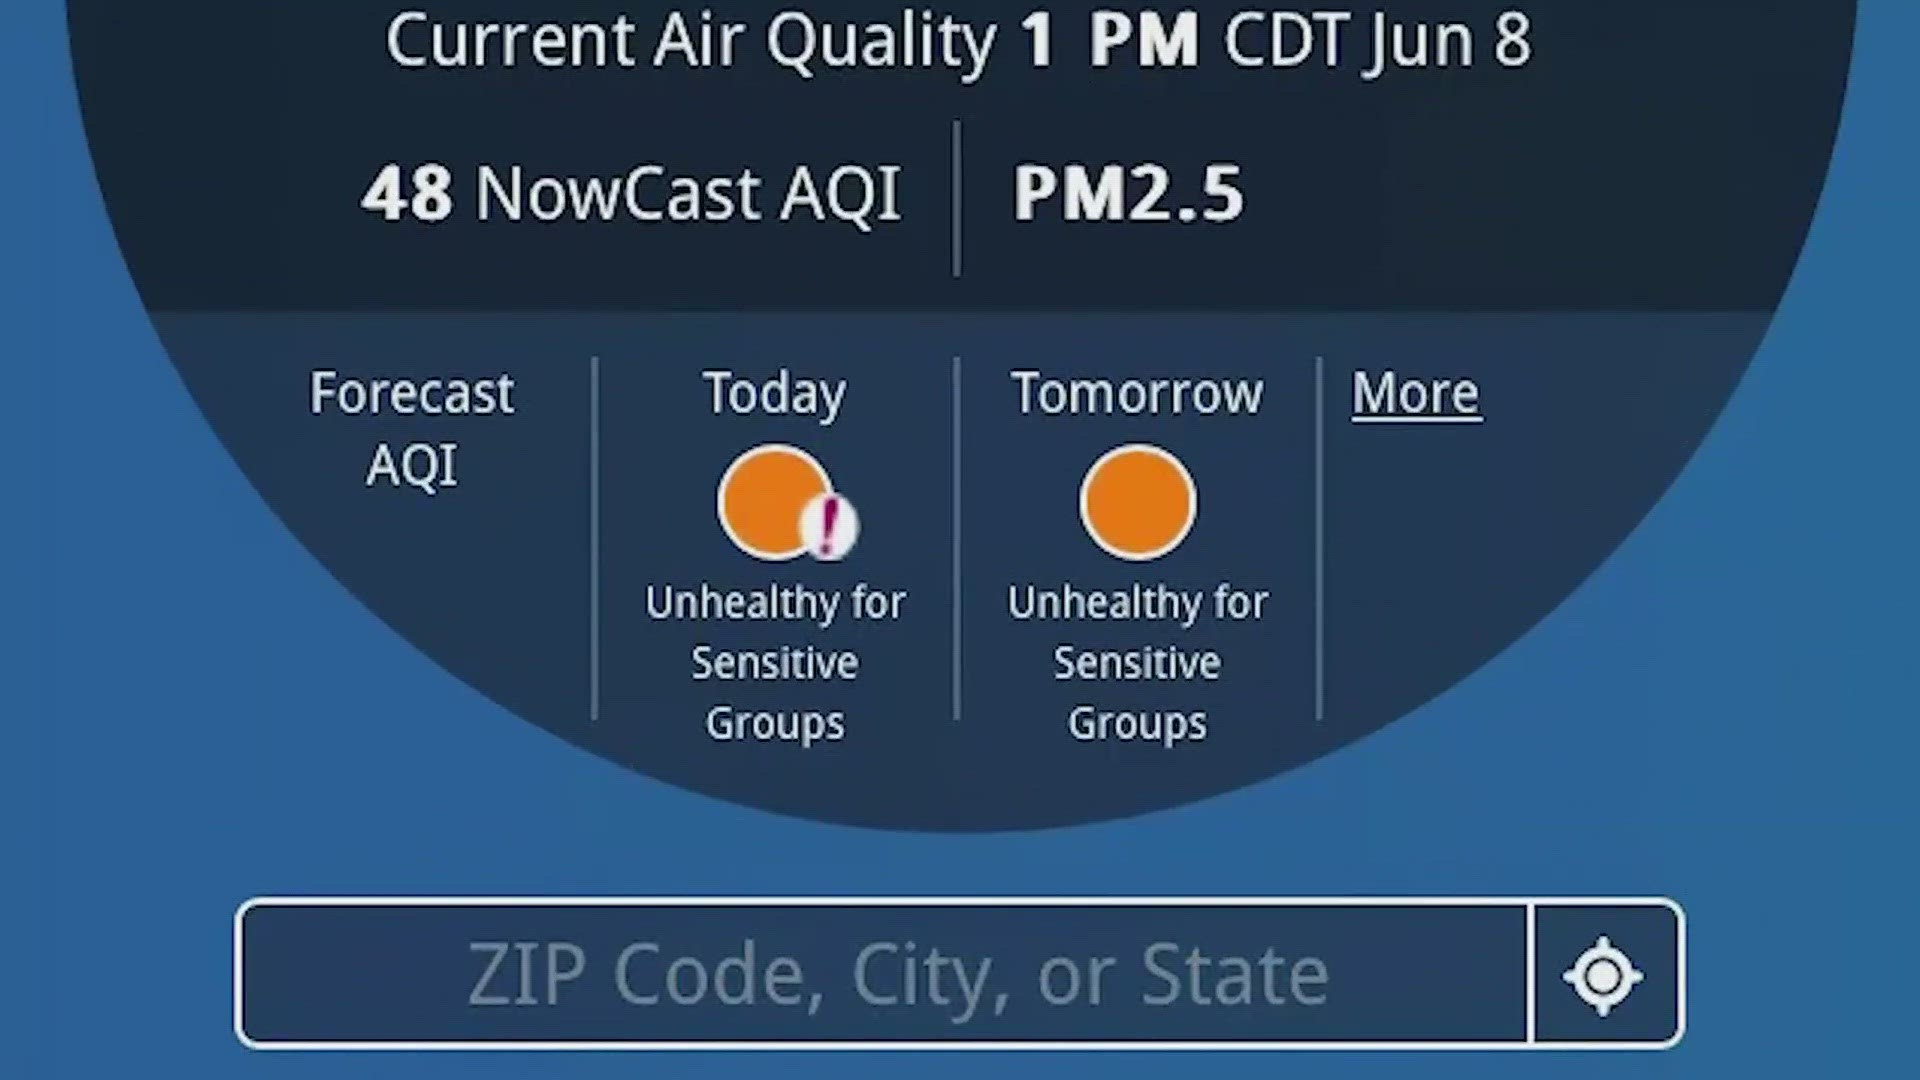 Air Alliance Houston said there have already been 15 high ozone days in 2023, as of June 8, an increase from previous years.